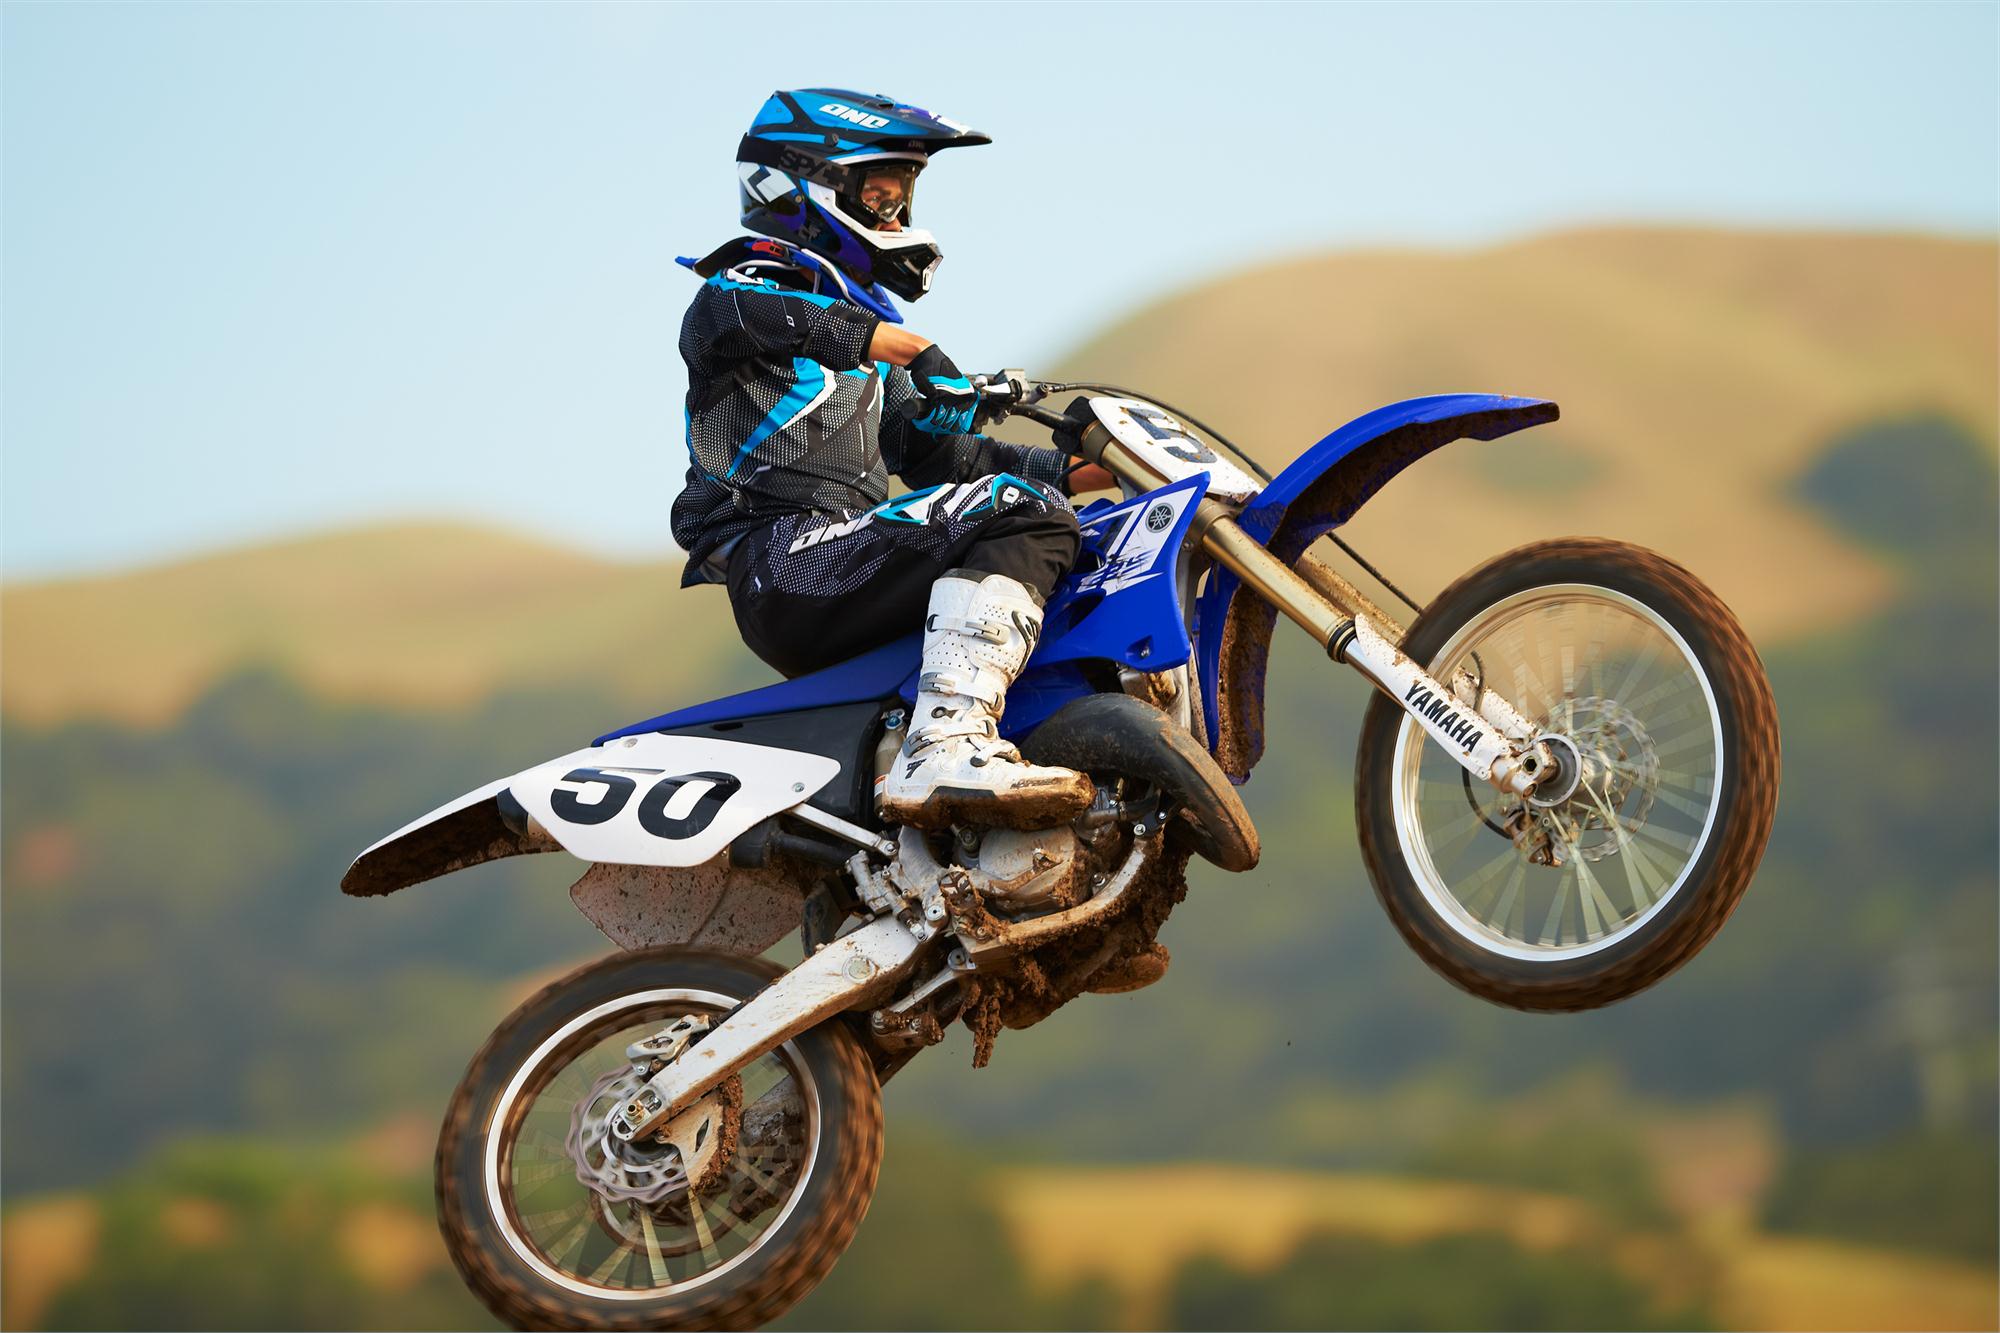 2013-yamaha-yz125-race-ready-out-of-the-crate-photo-gallery_6